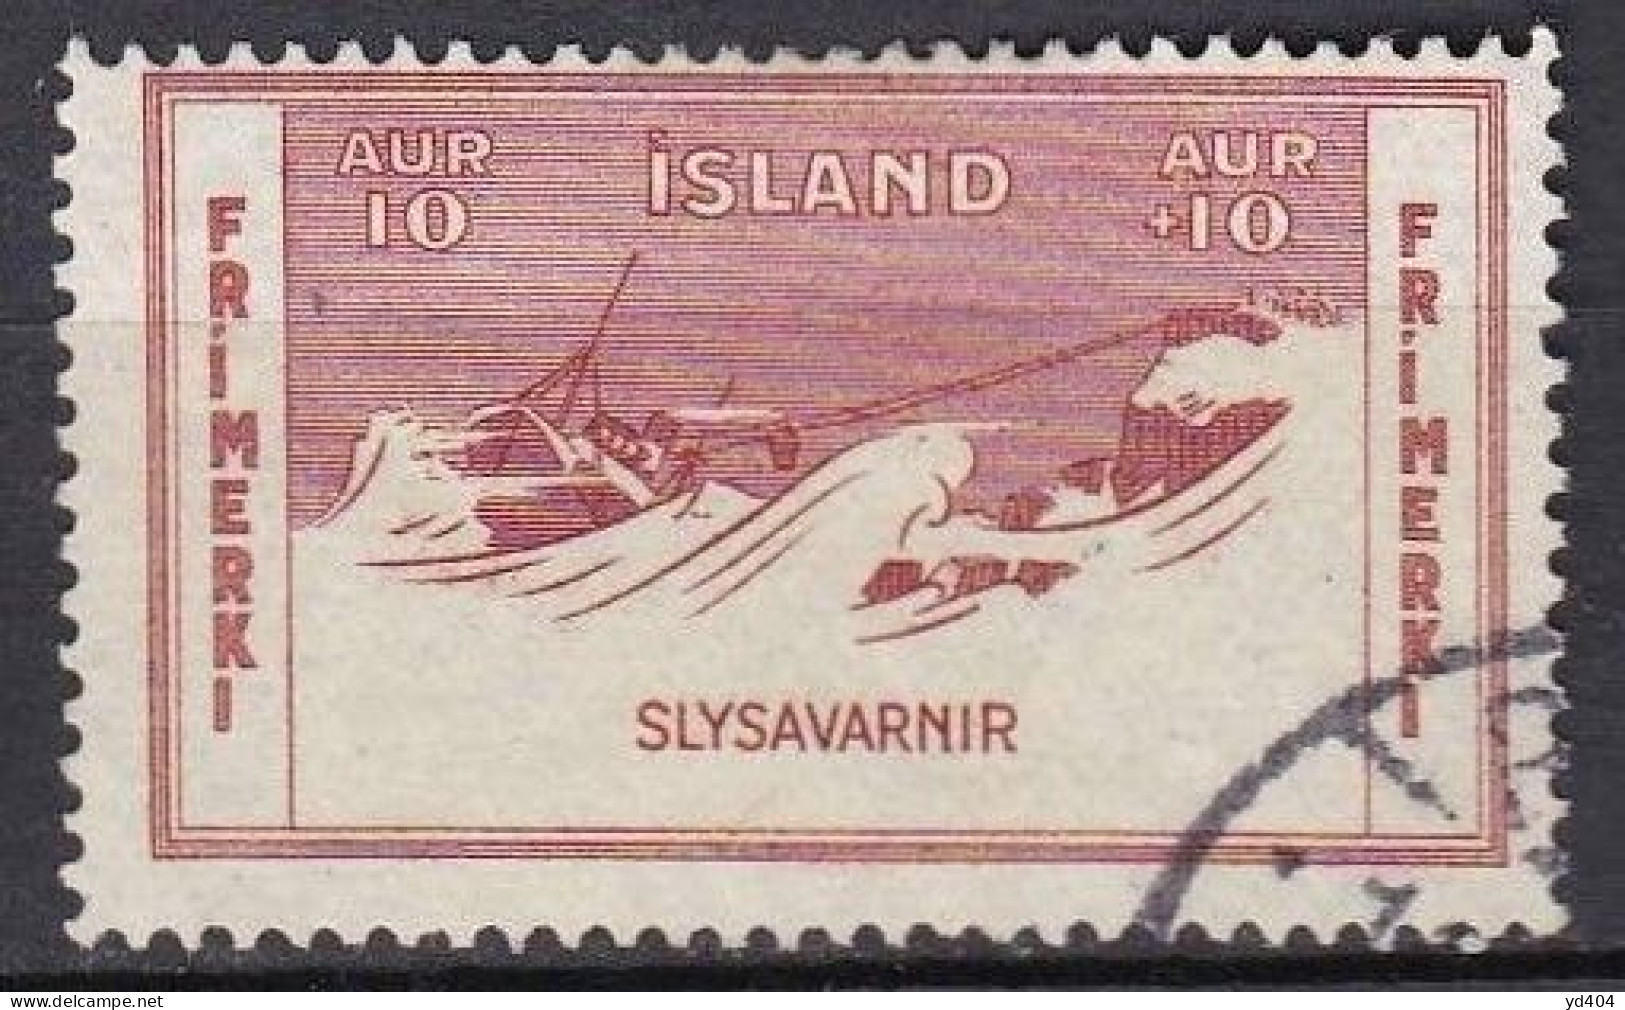 IS029A – ISLANDE – ICELAND – 1933 – MARITIME WORKS & RESCUE – SG # 201 USED 6,50 € - Usados